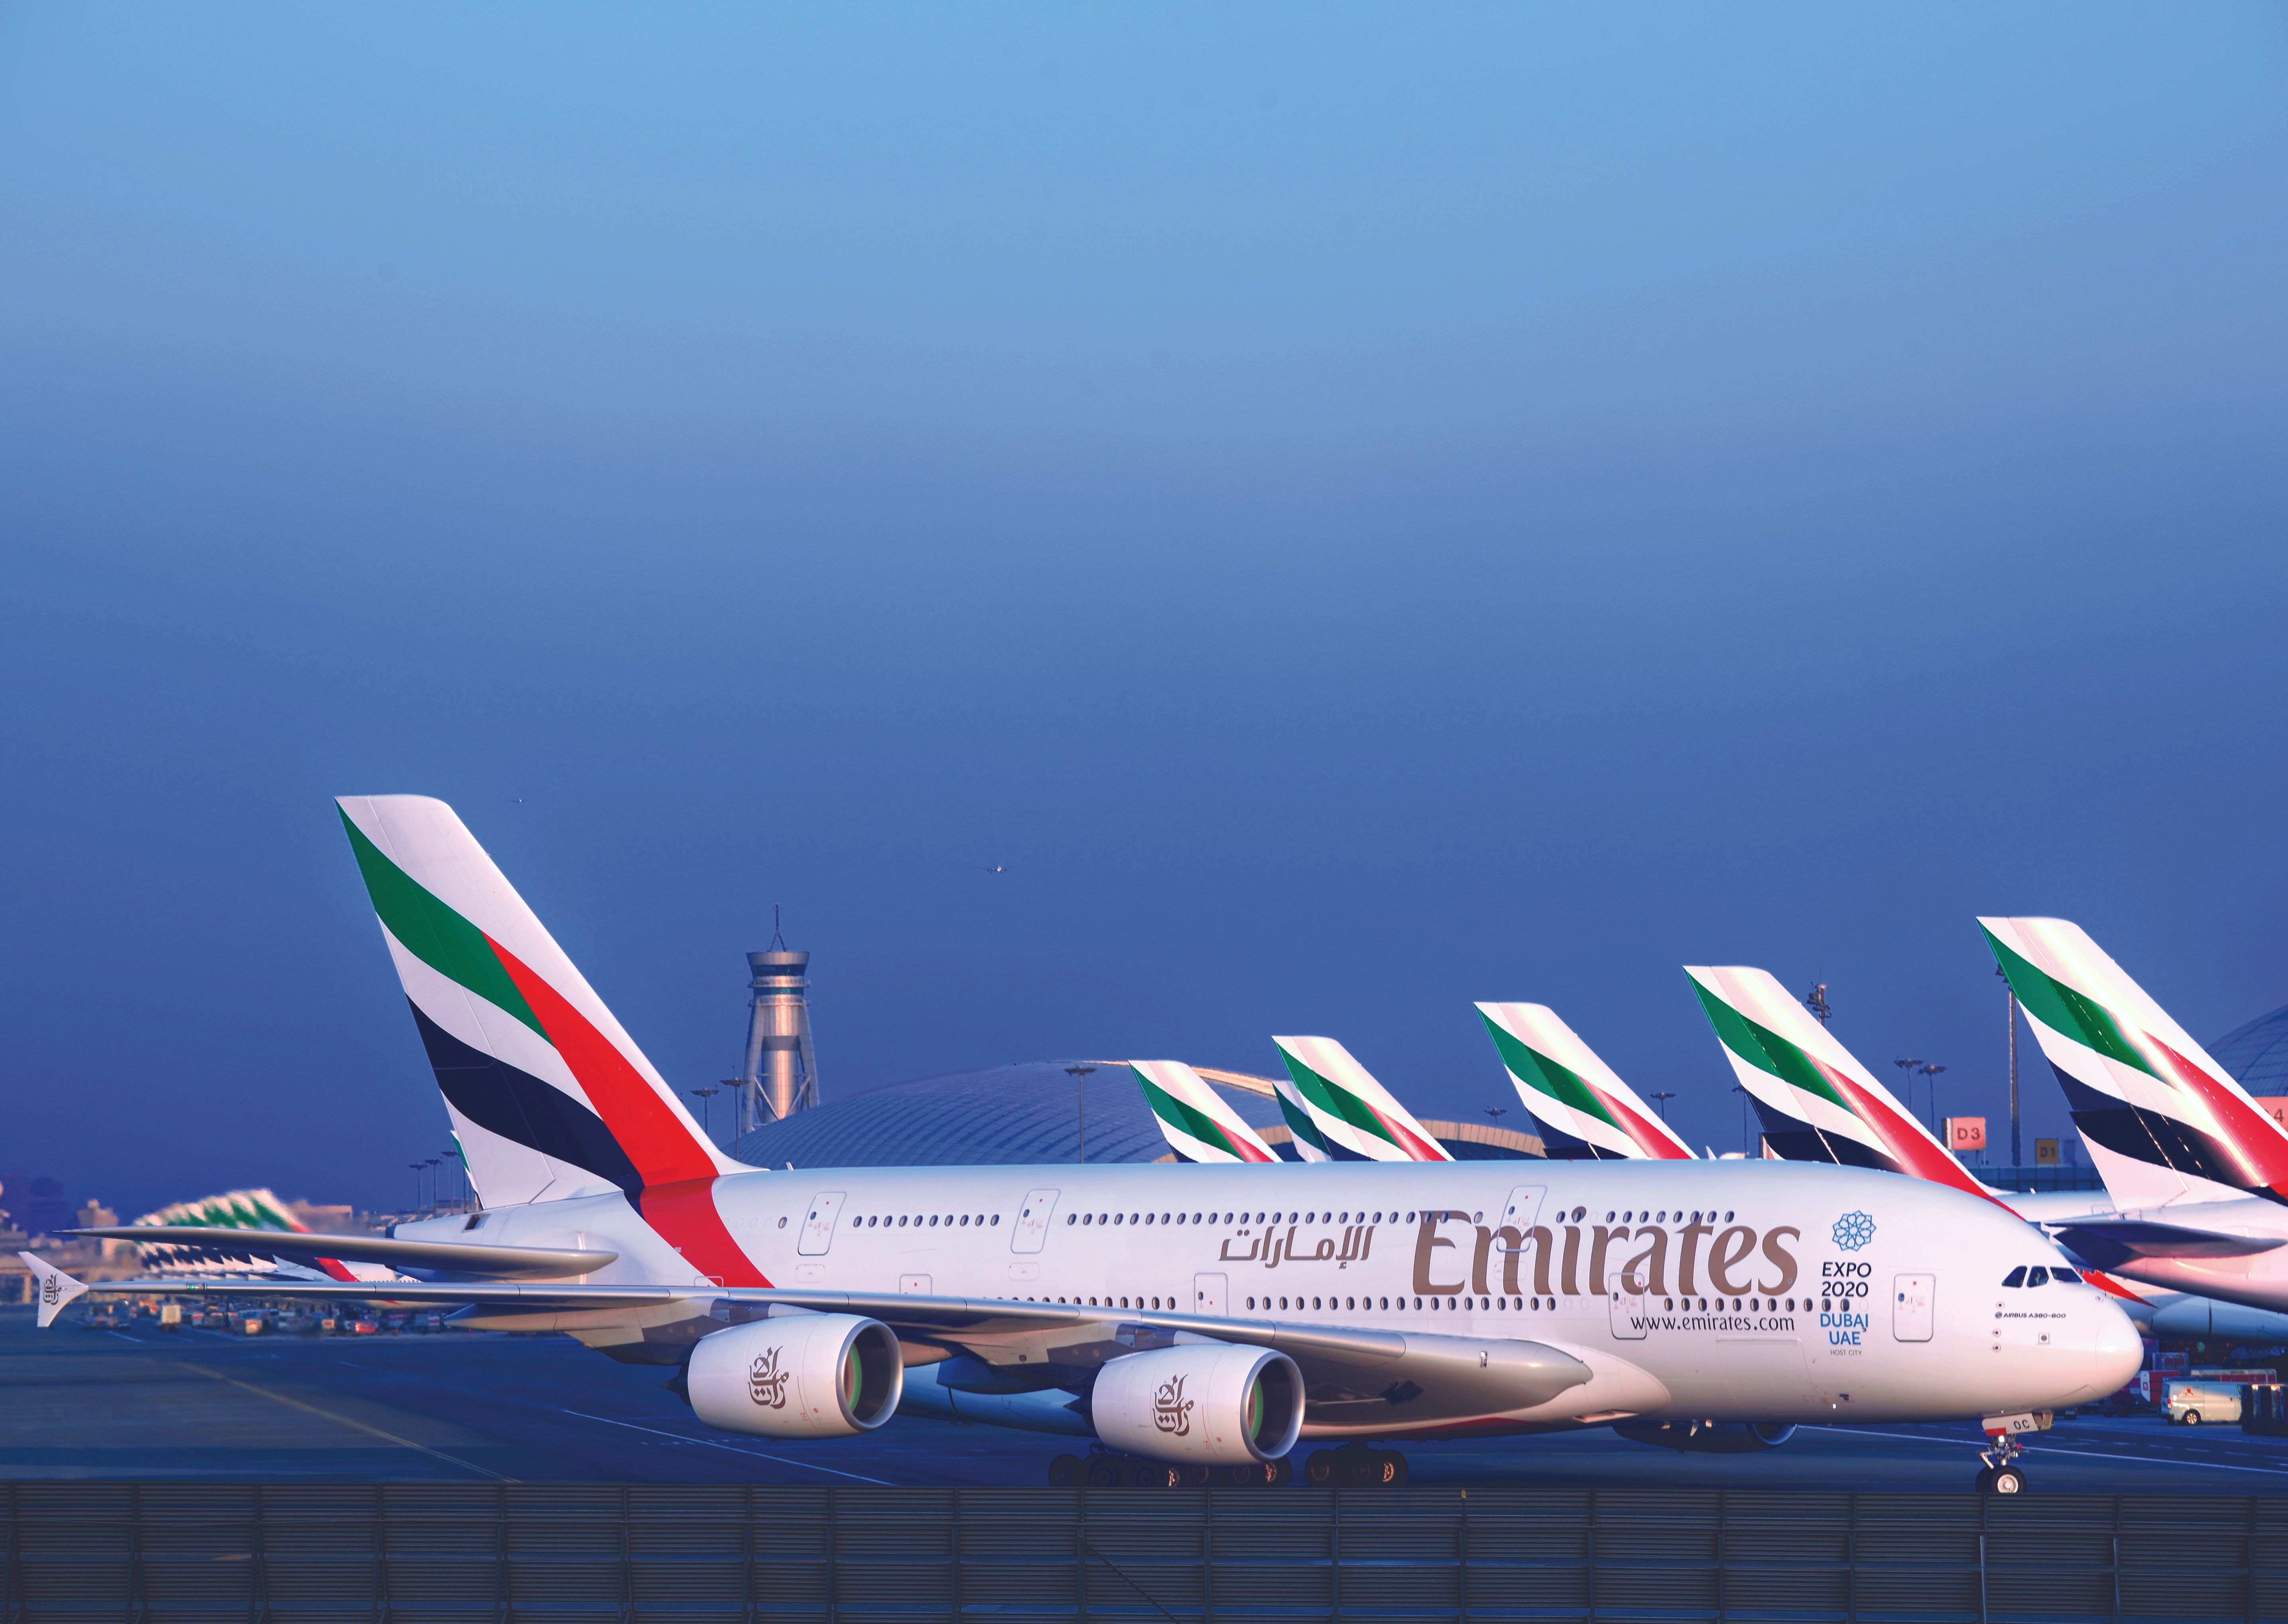 Emirates A380 parked in Dubai